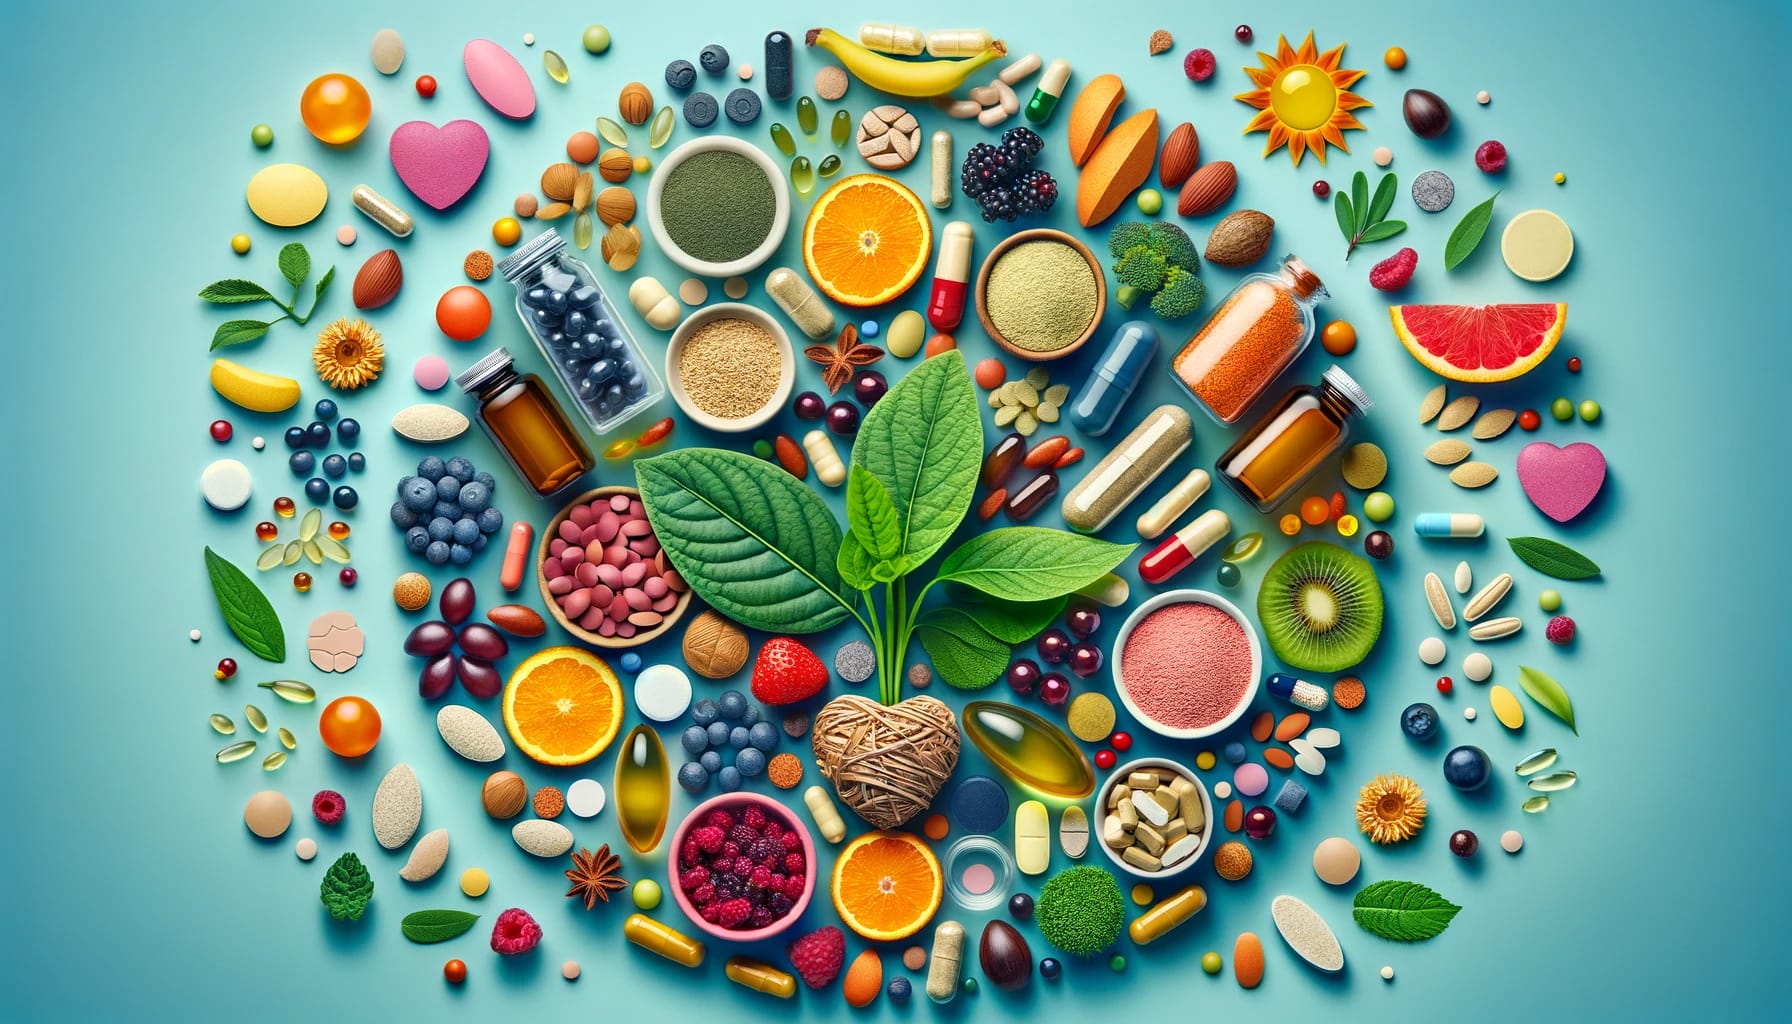 Collage of health supplements including vitamins, minerals, herbal extracts, berries, and nuts on a vibrant background.